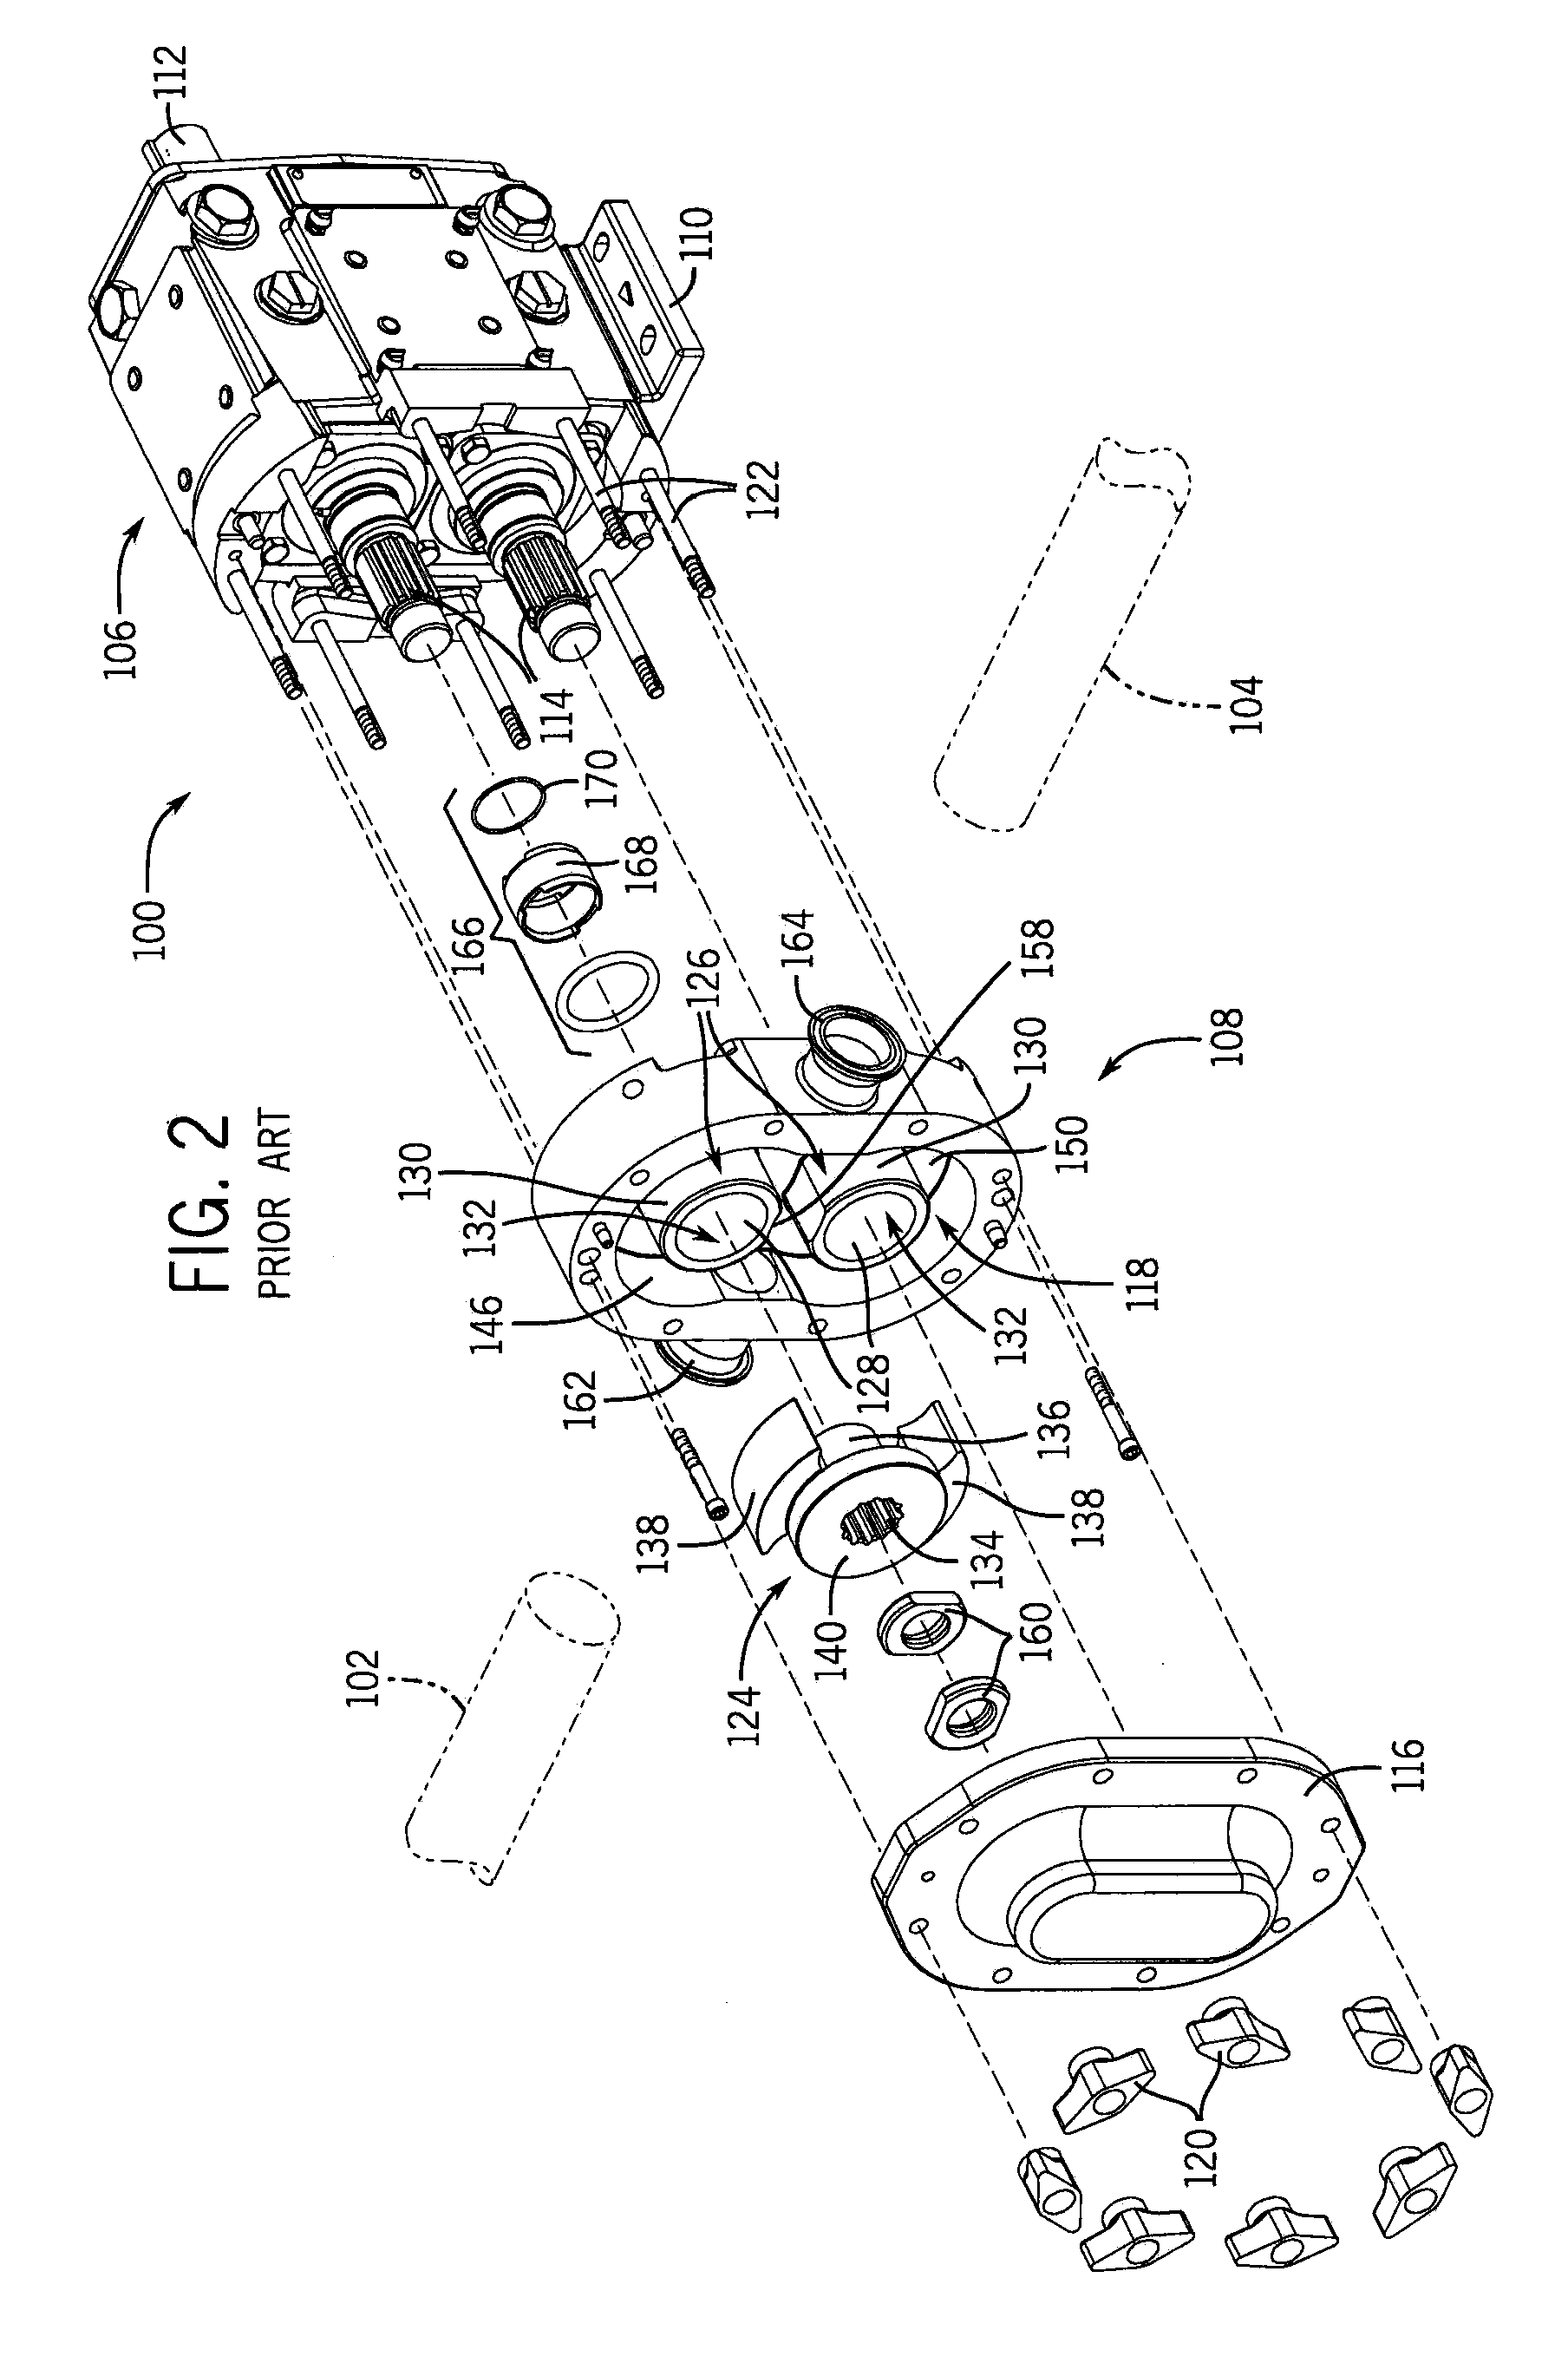 Positive displacement pump with improved sealing arrangement and related method of making